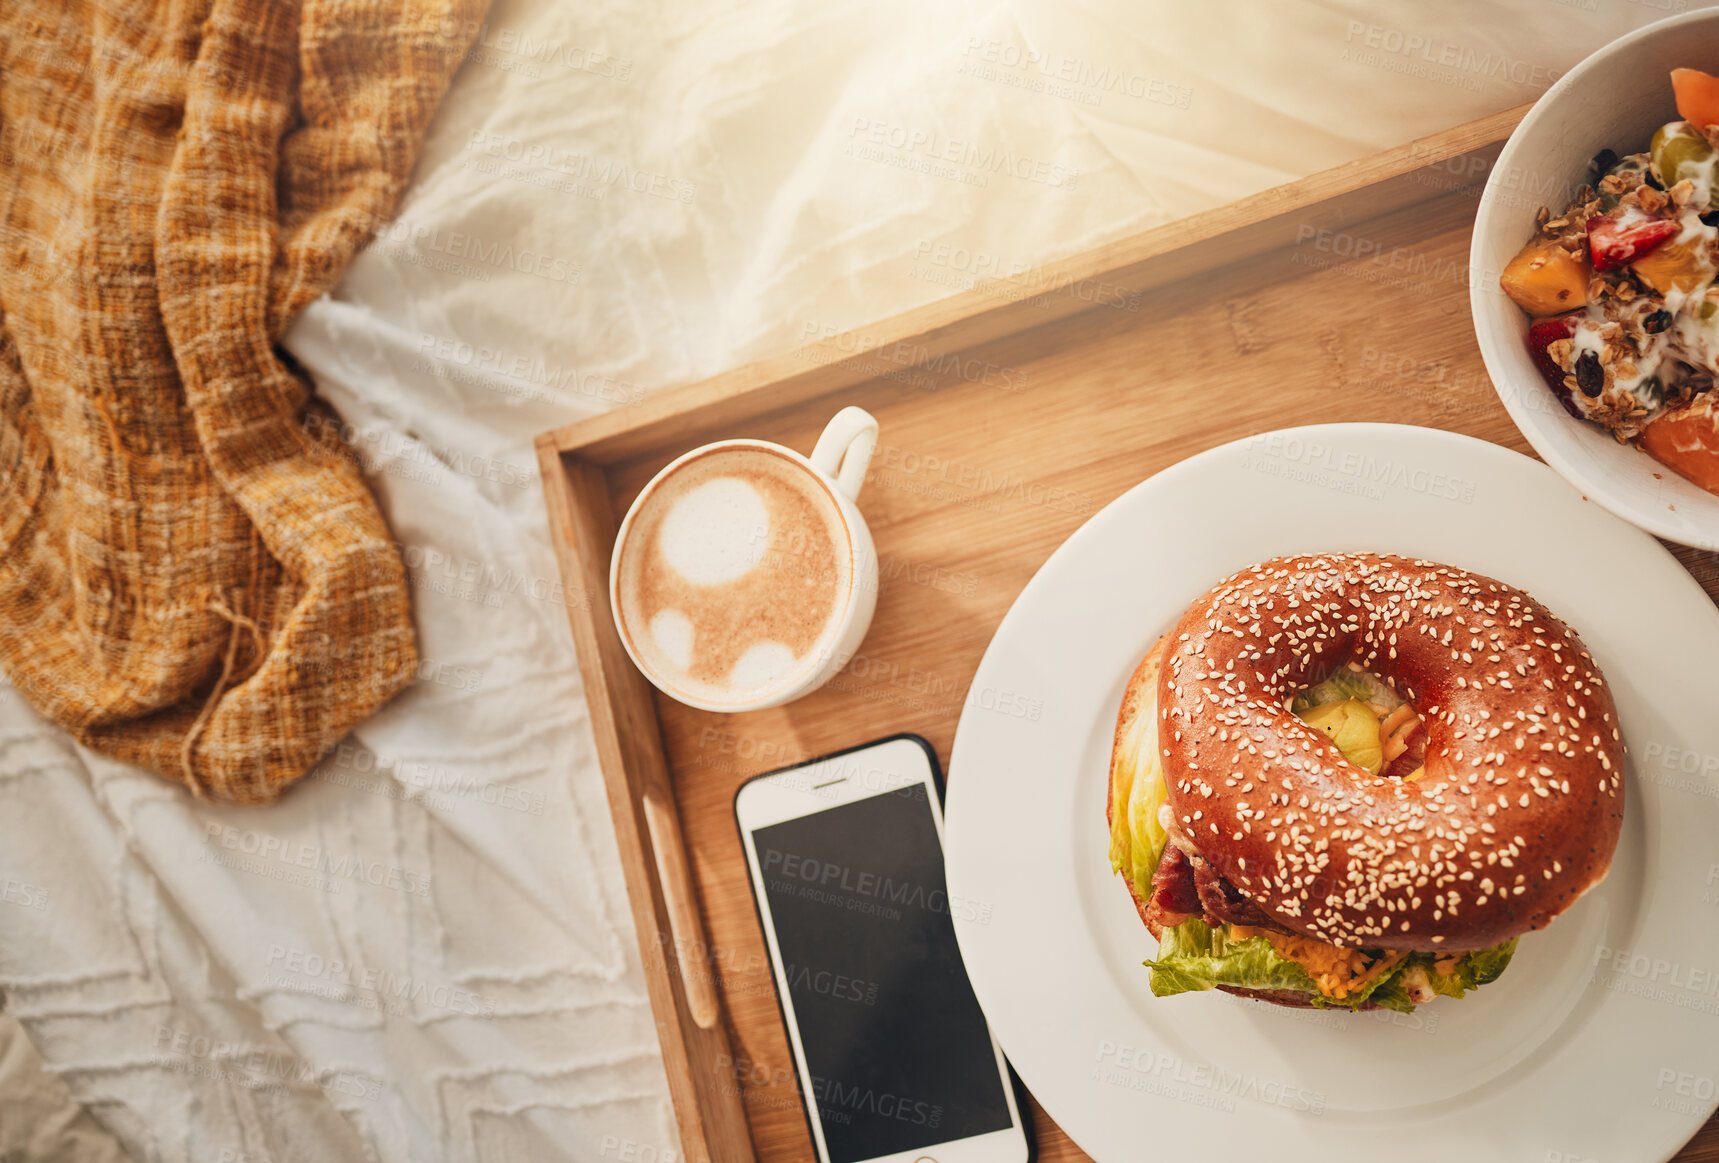 Buy stock photo The perfect mothers day gift. A tray of a well balanced breakfast, a bagel, coffee and a cellphone. Everything needed for breakfast in bed